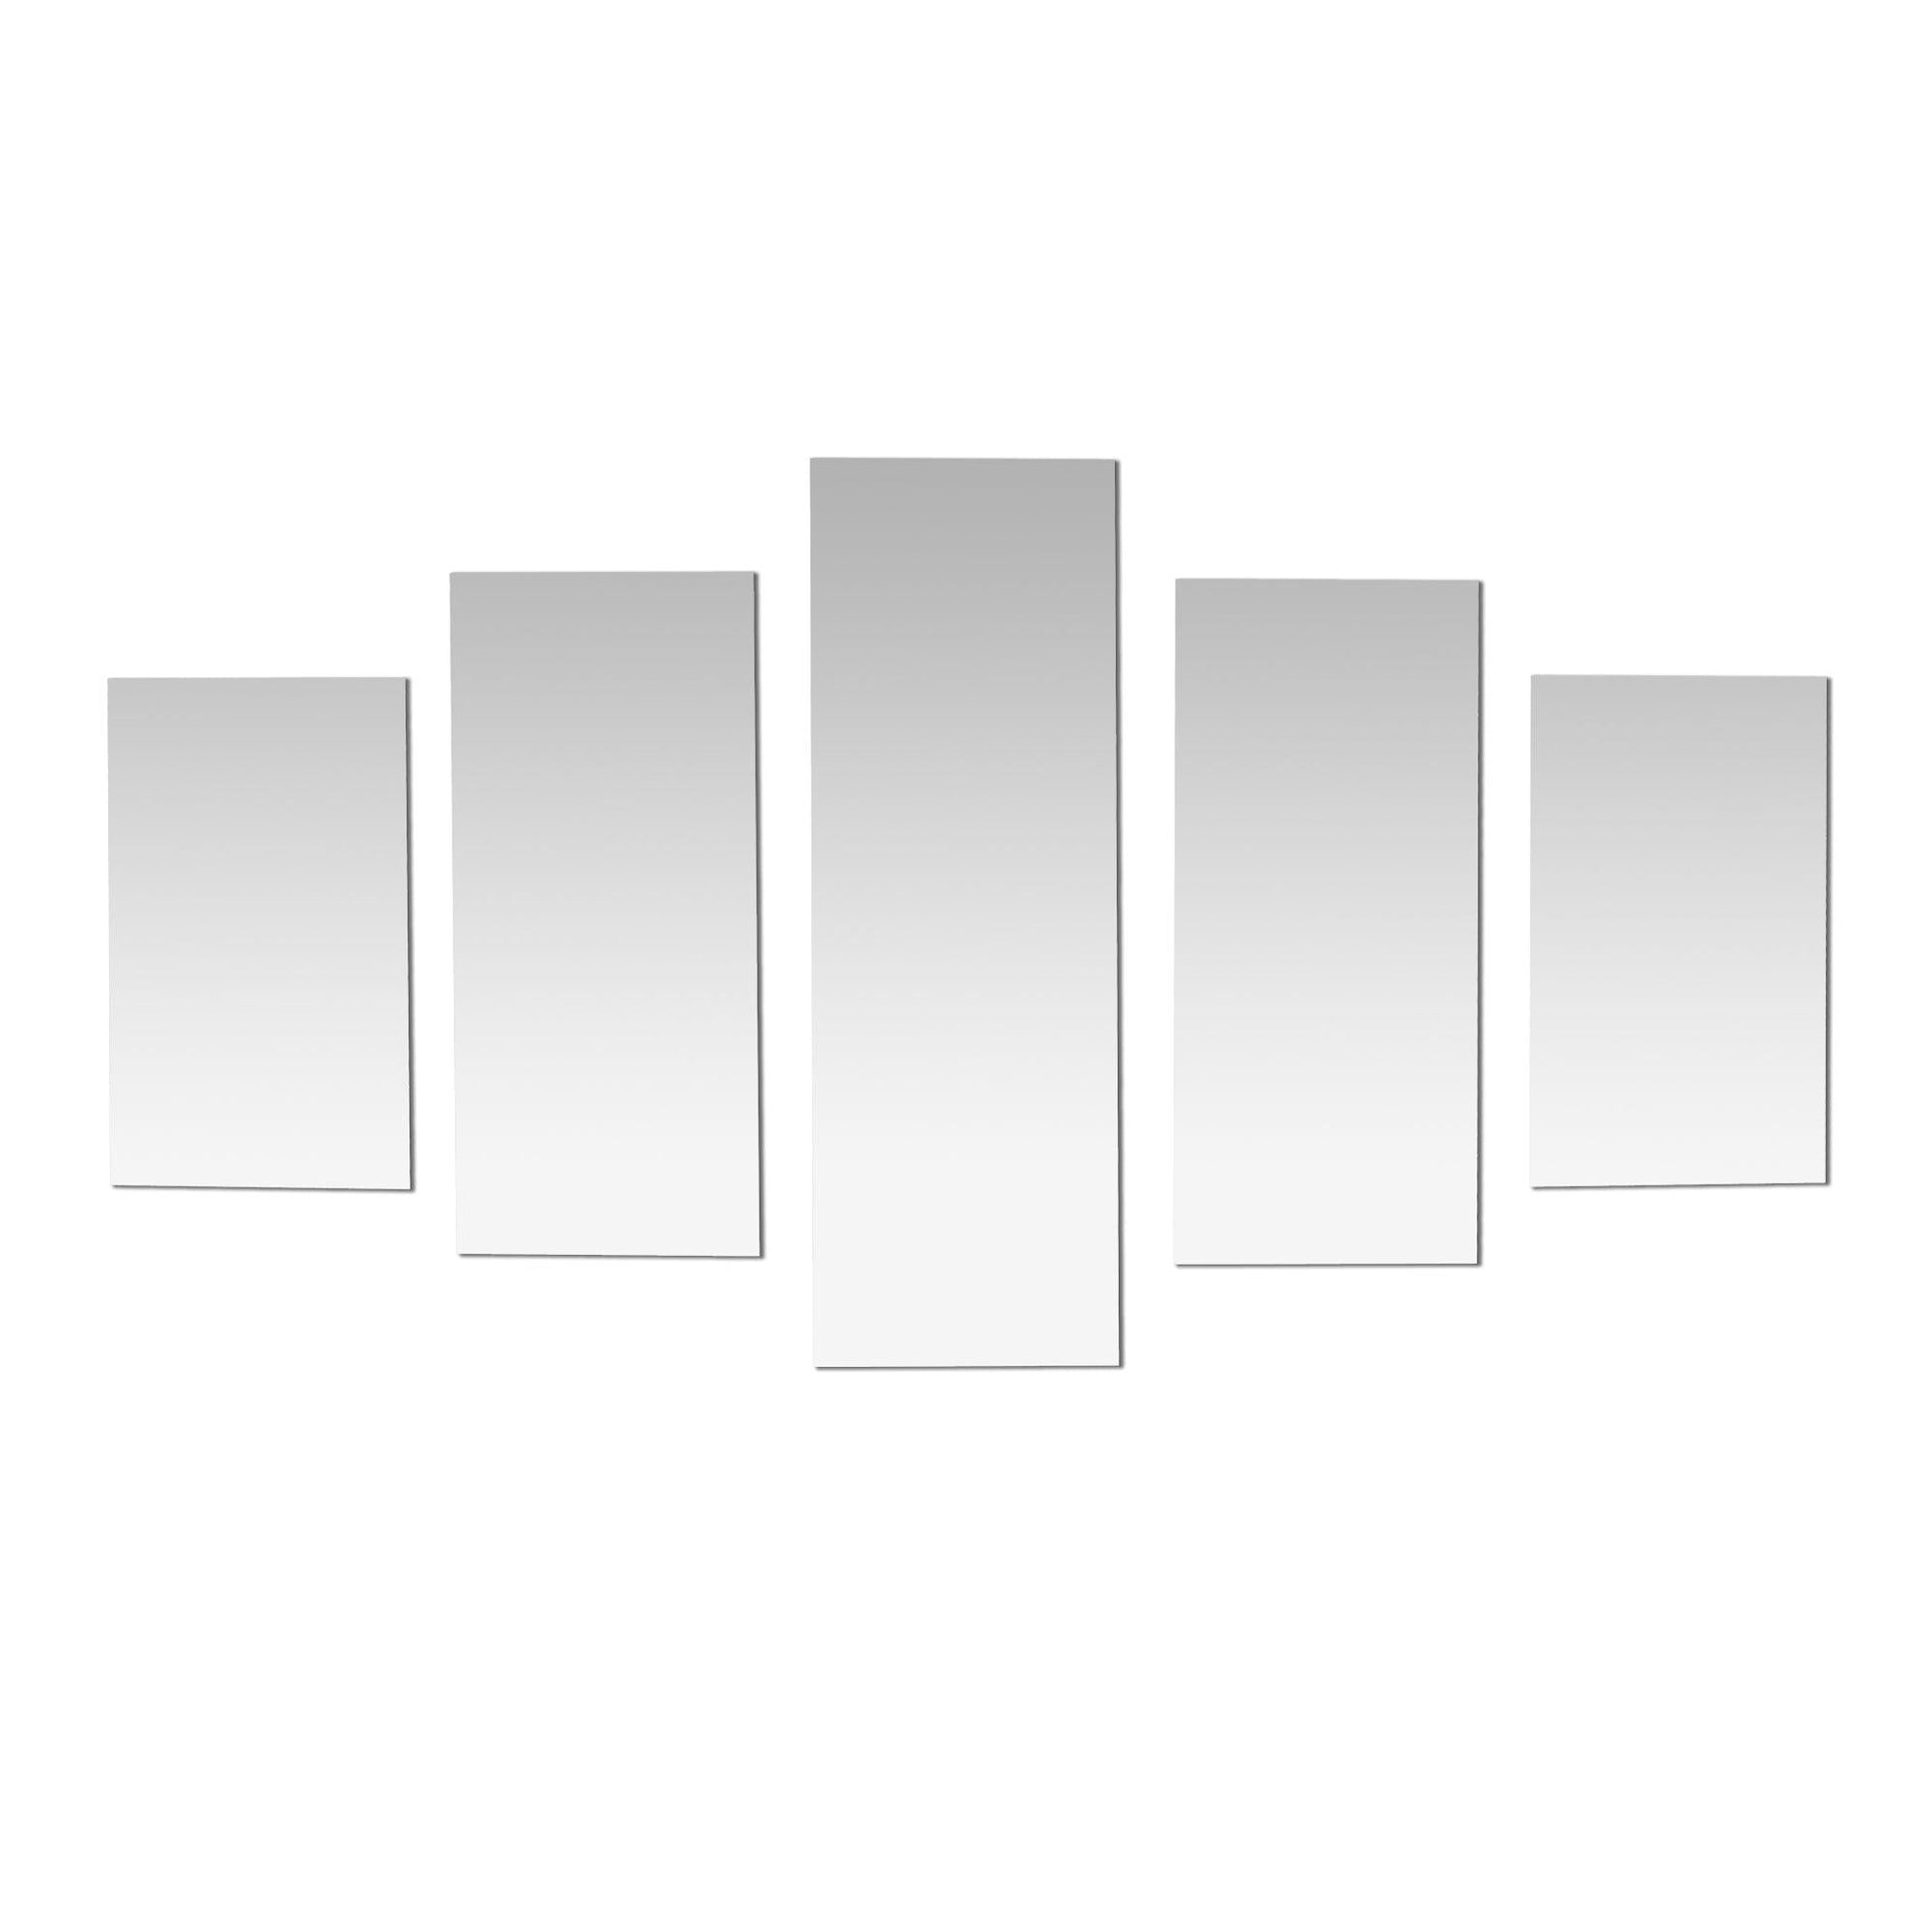 Americanflat Adhesive Mirror Tiles - Peel and Stick Mirrors for